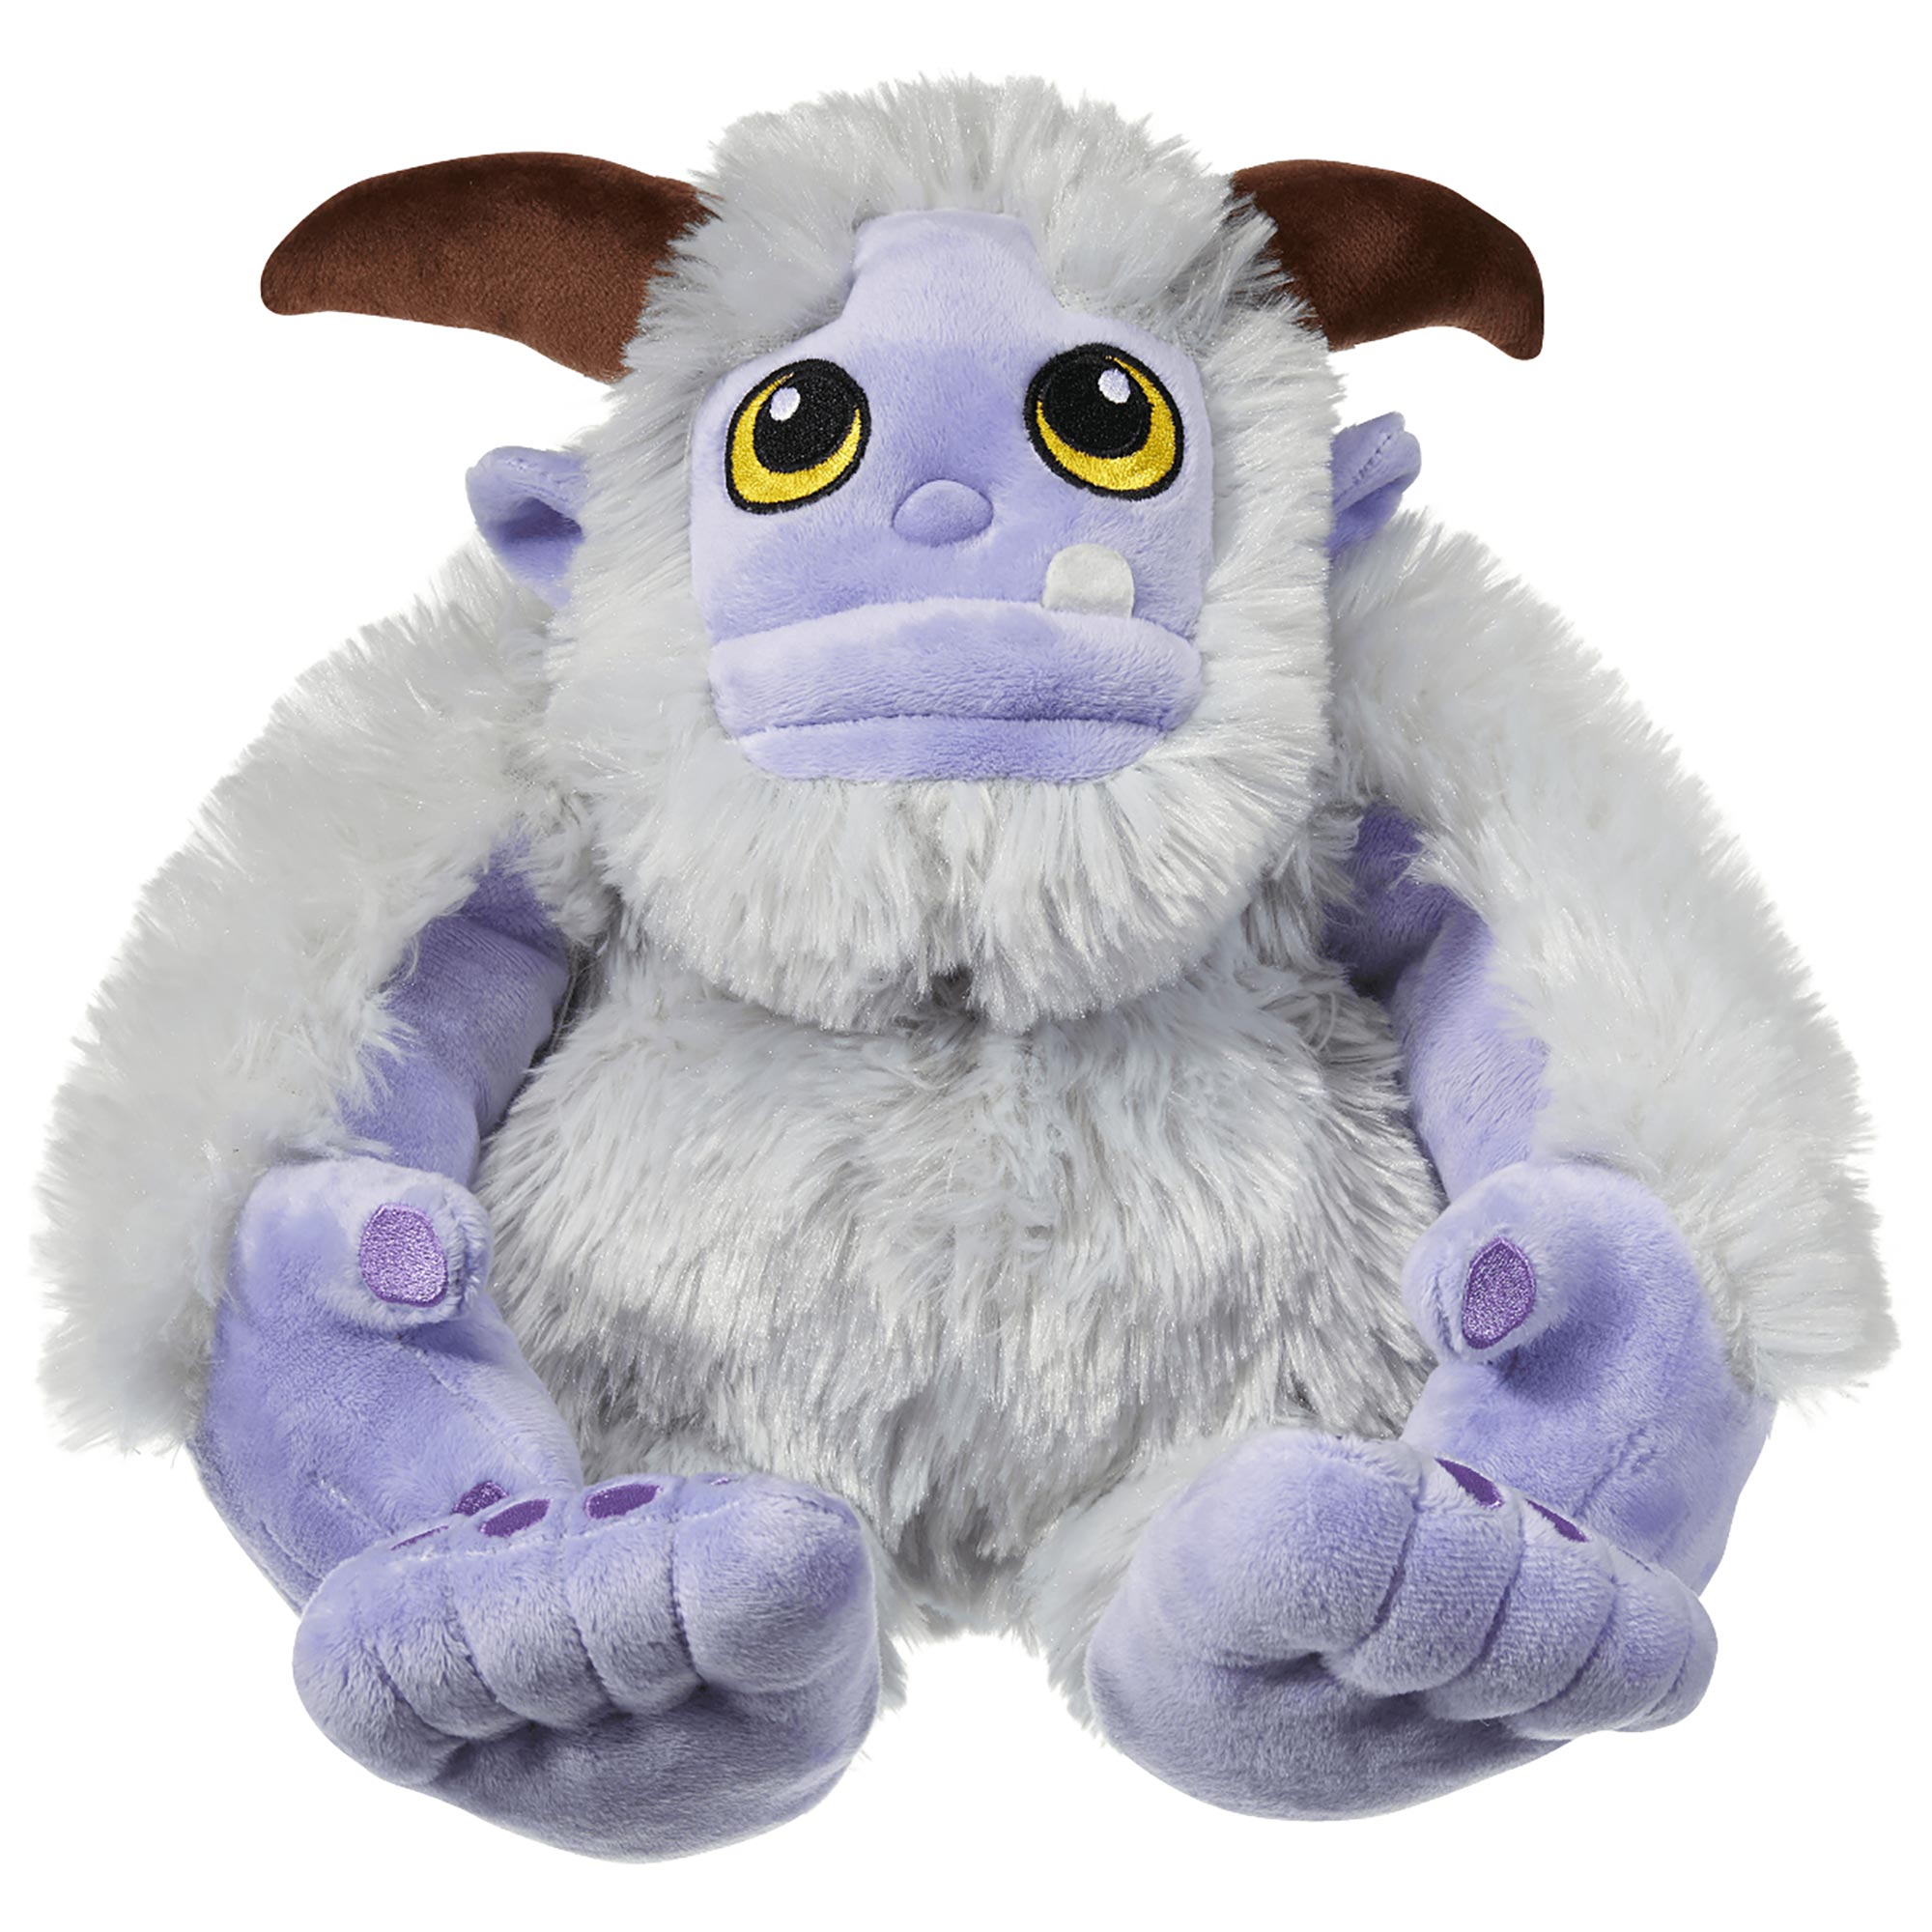 wholesale cuddly toys